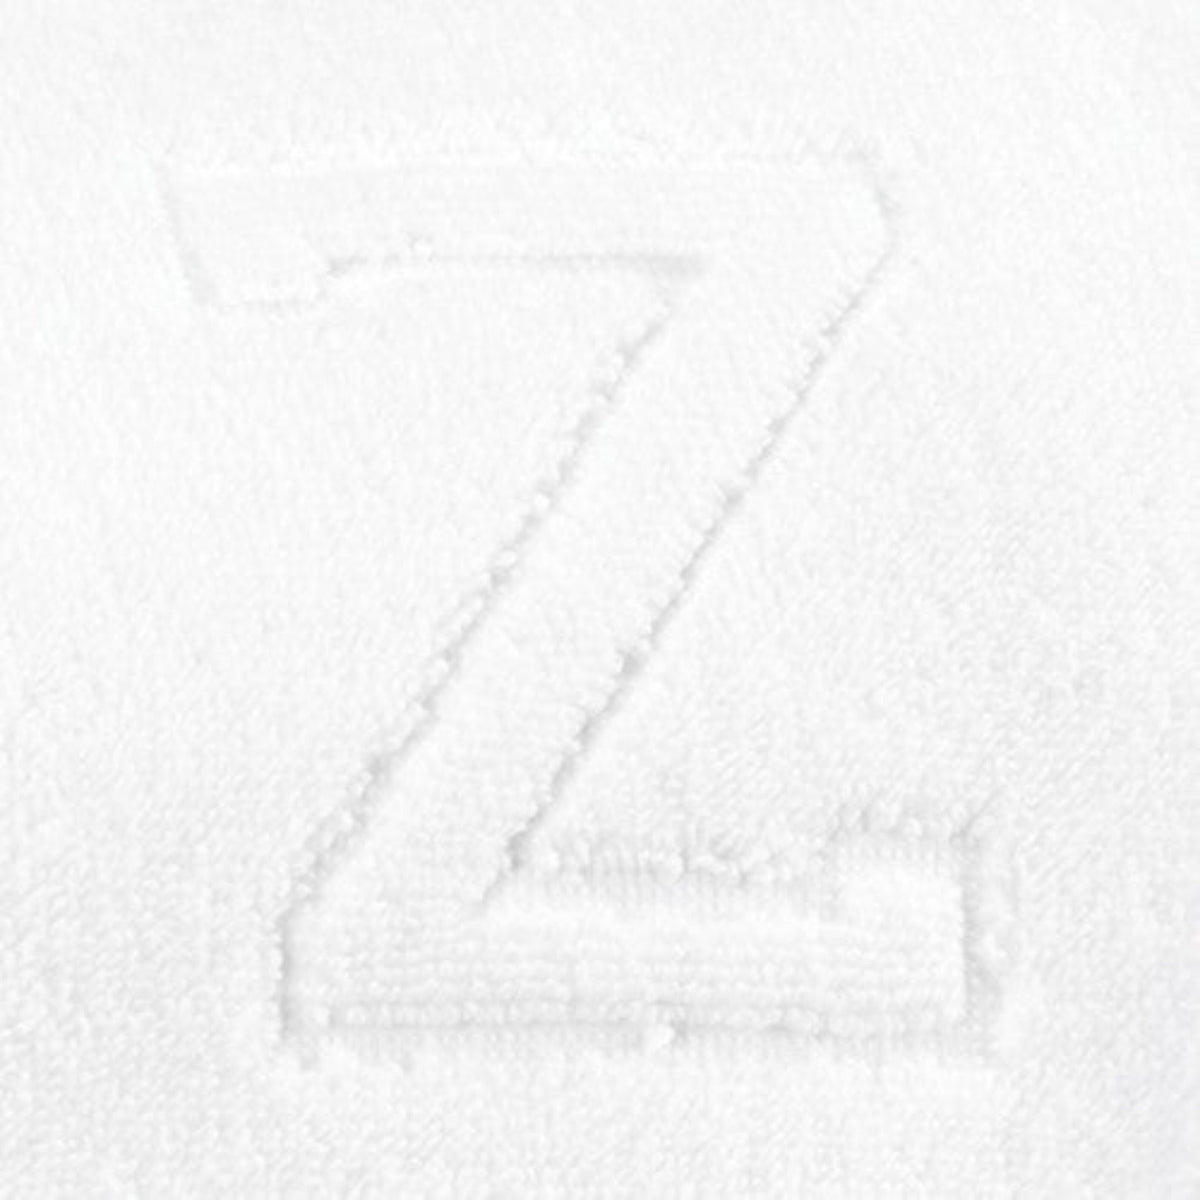 Swatch Sample of Letter Z Matouk Auberge Bath Towels